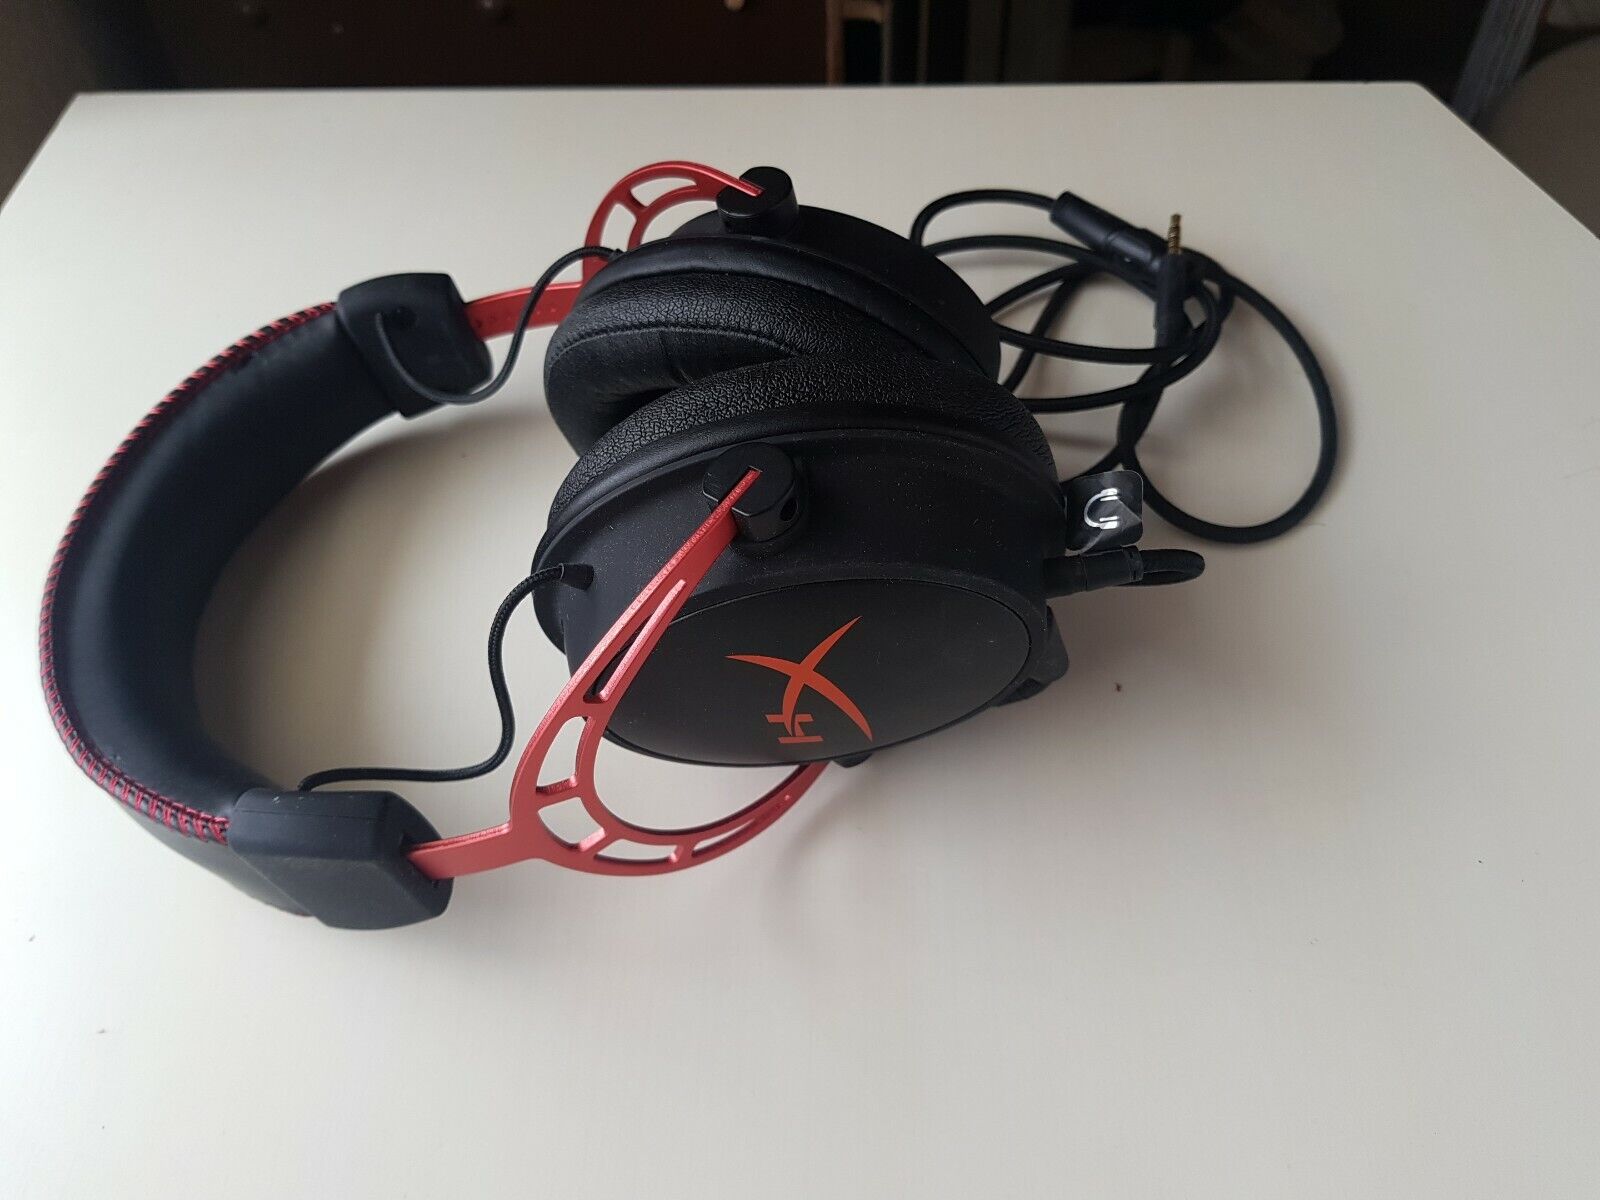 HyperX Cloud Alpha Kingston Gaming Headset / HX-HSCA-RD / Black and Red - Used